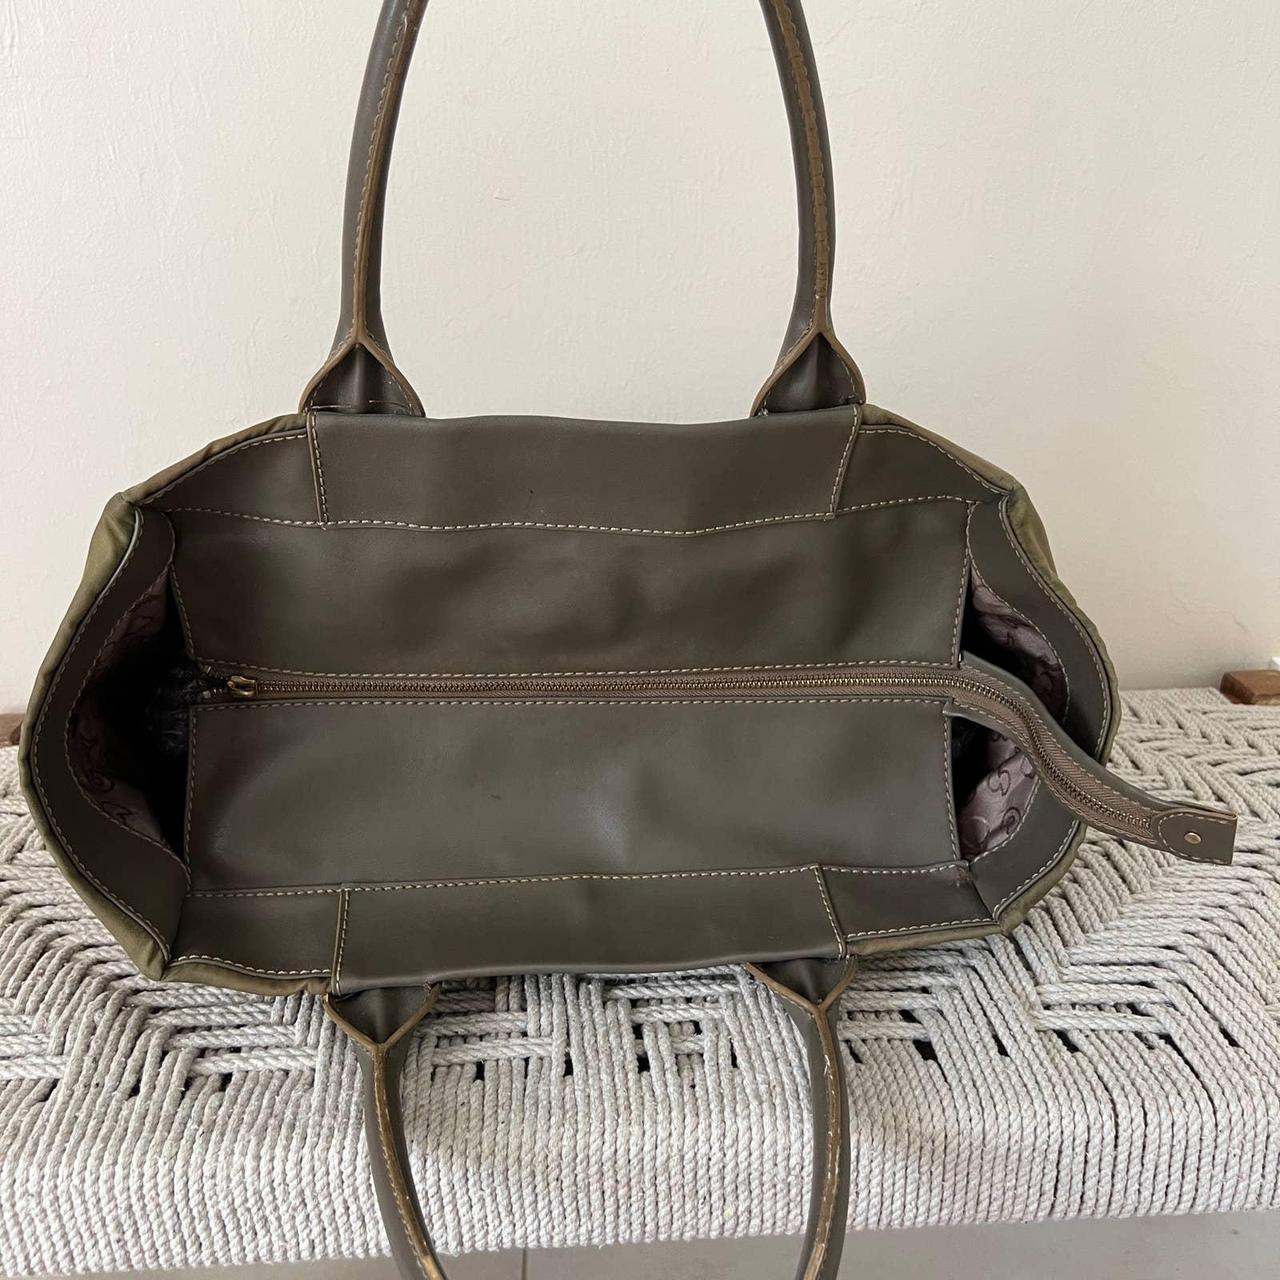 Marc Jacobs Diaper Bag used with stain at zipper - Depop